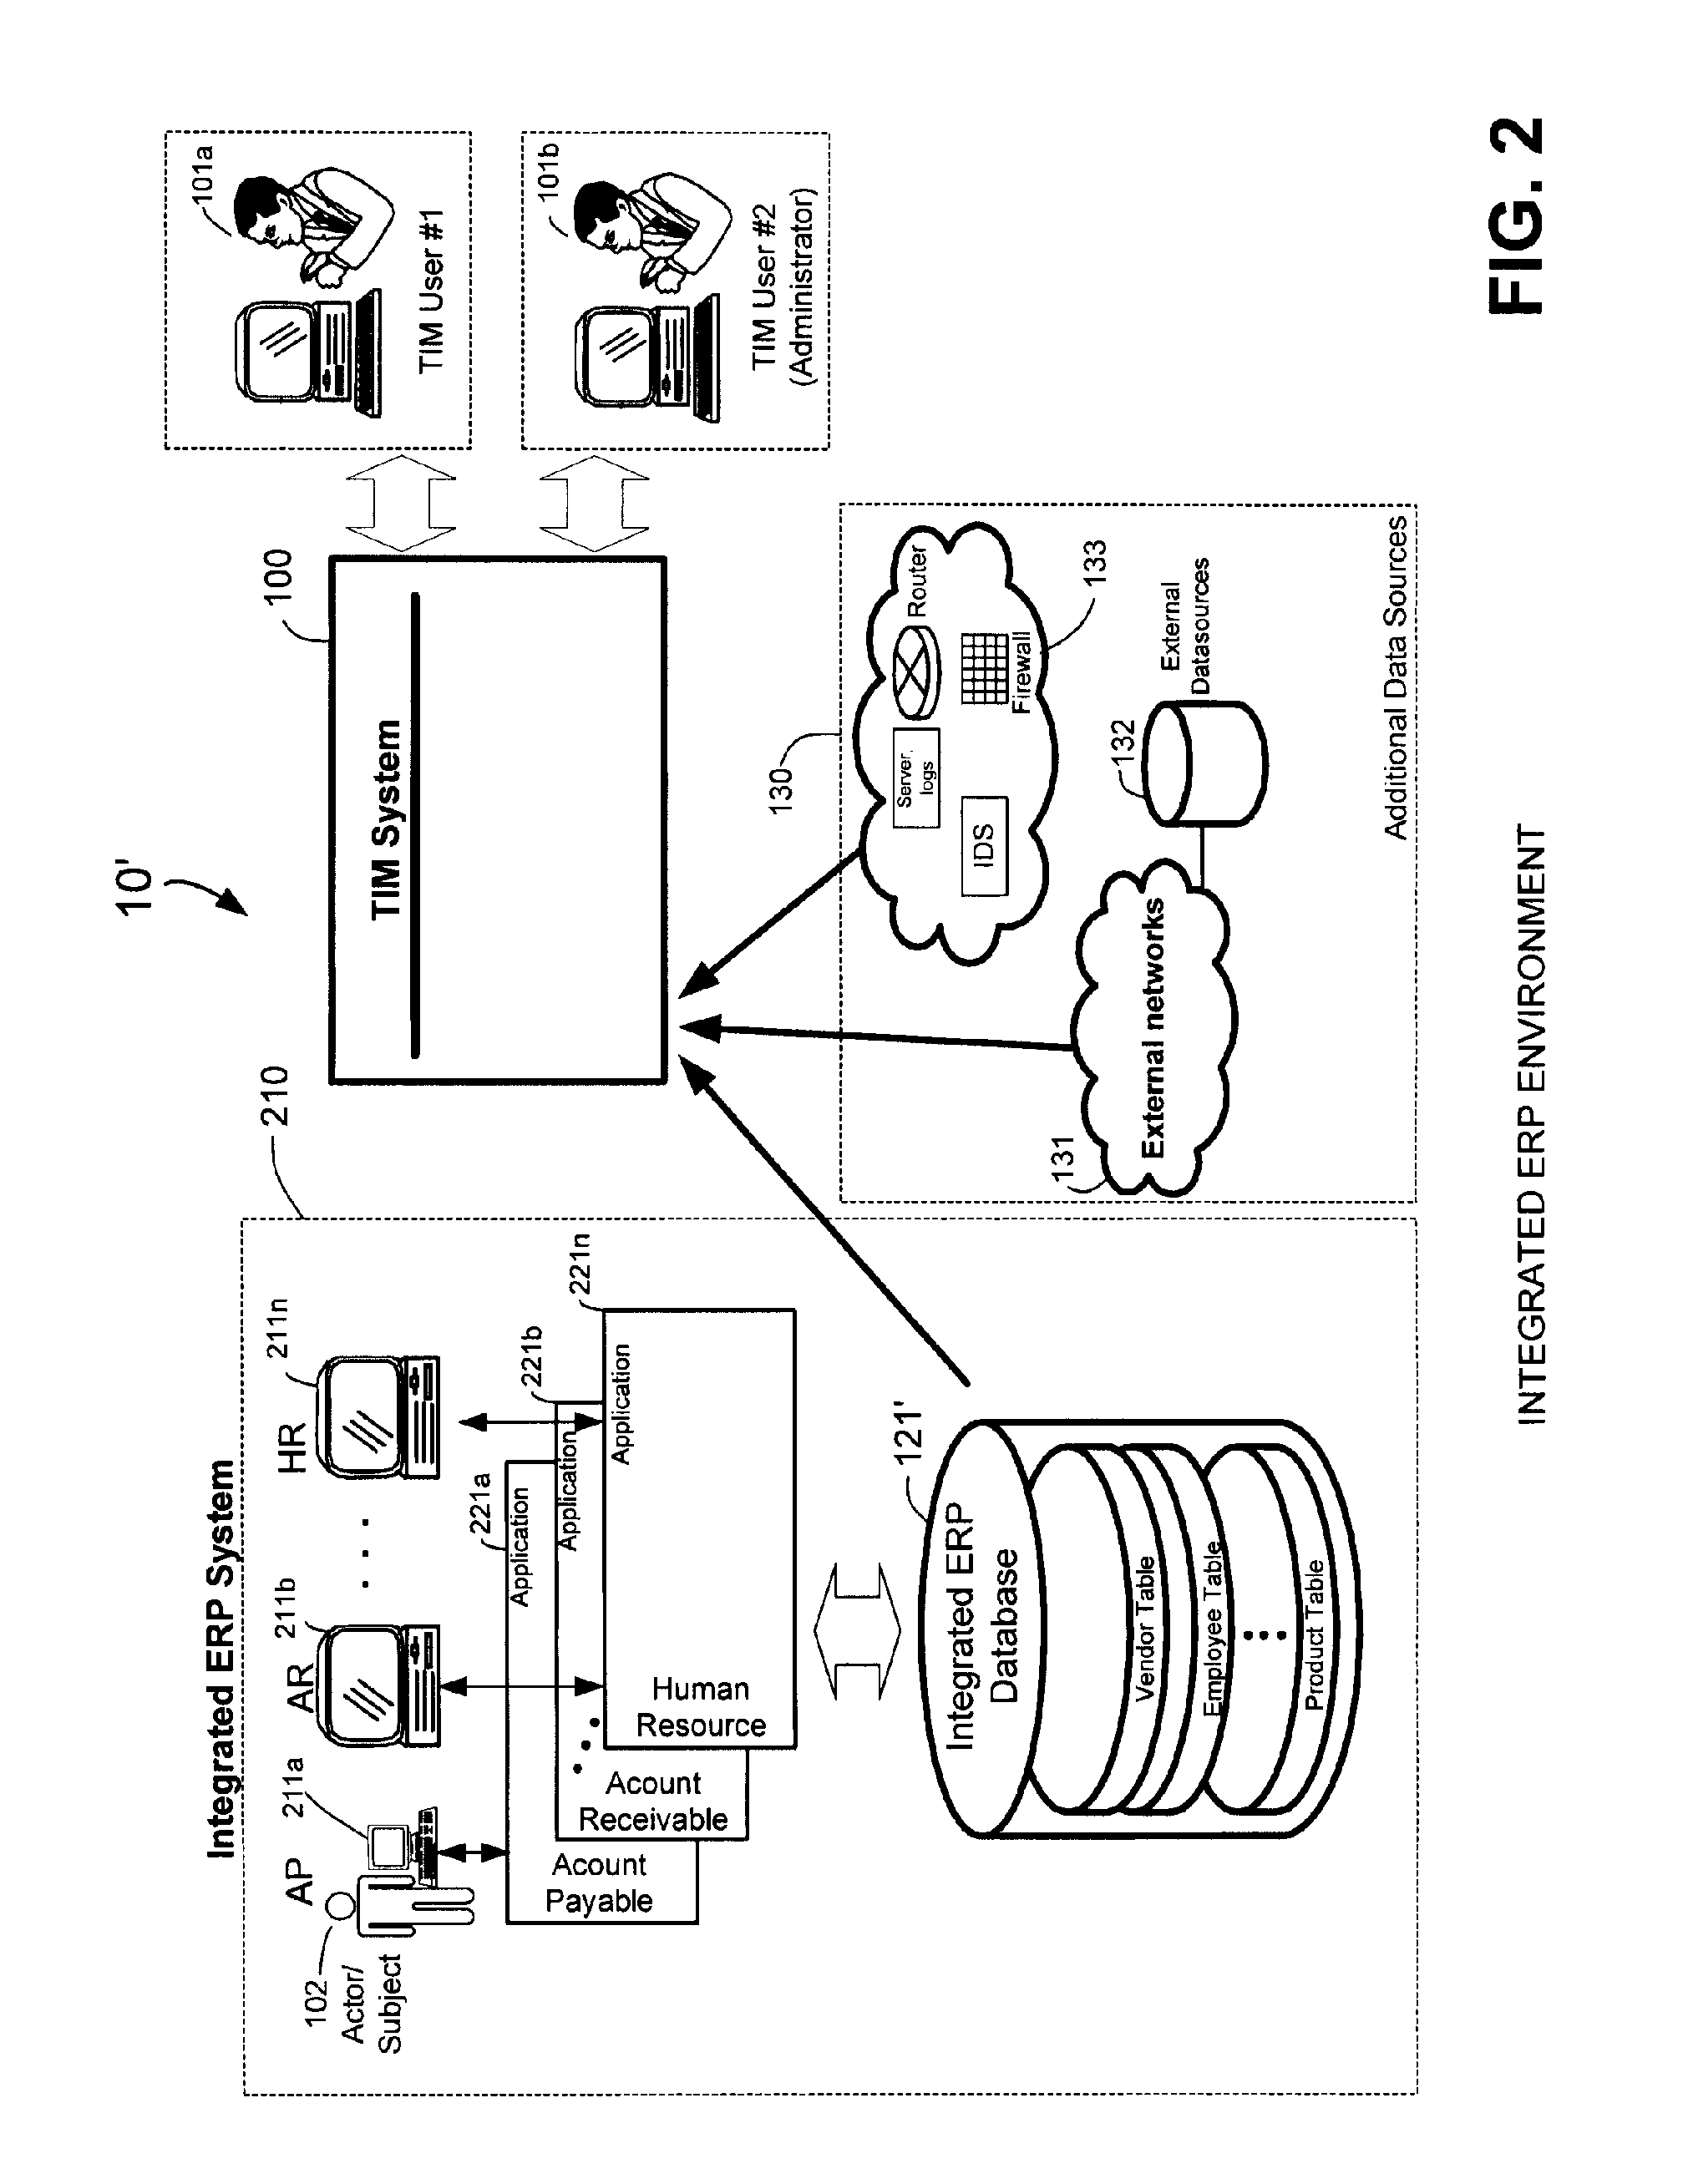 Methods and systems for policy statement execution engine